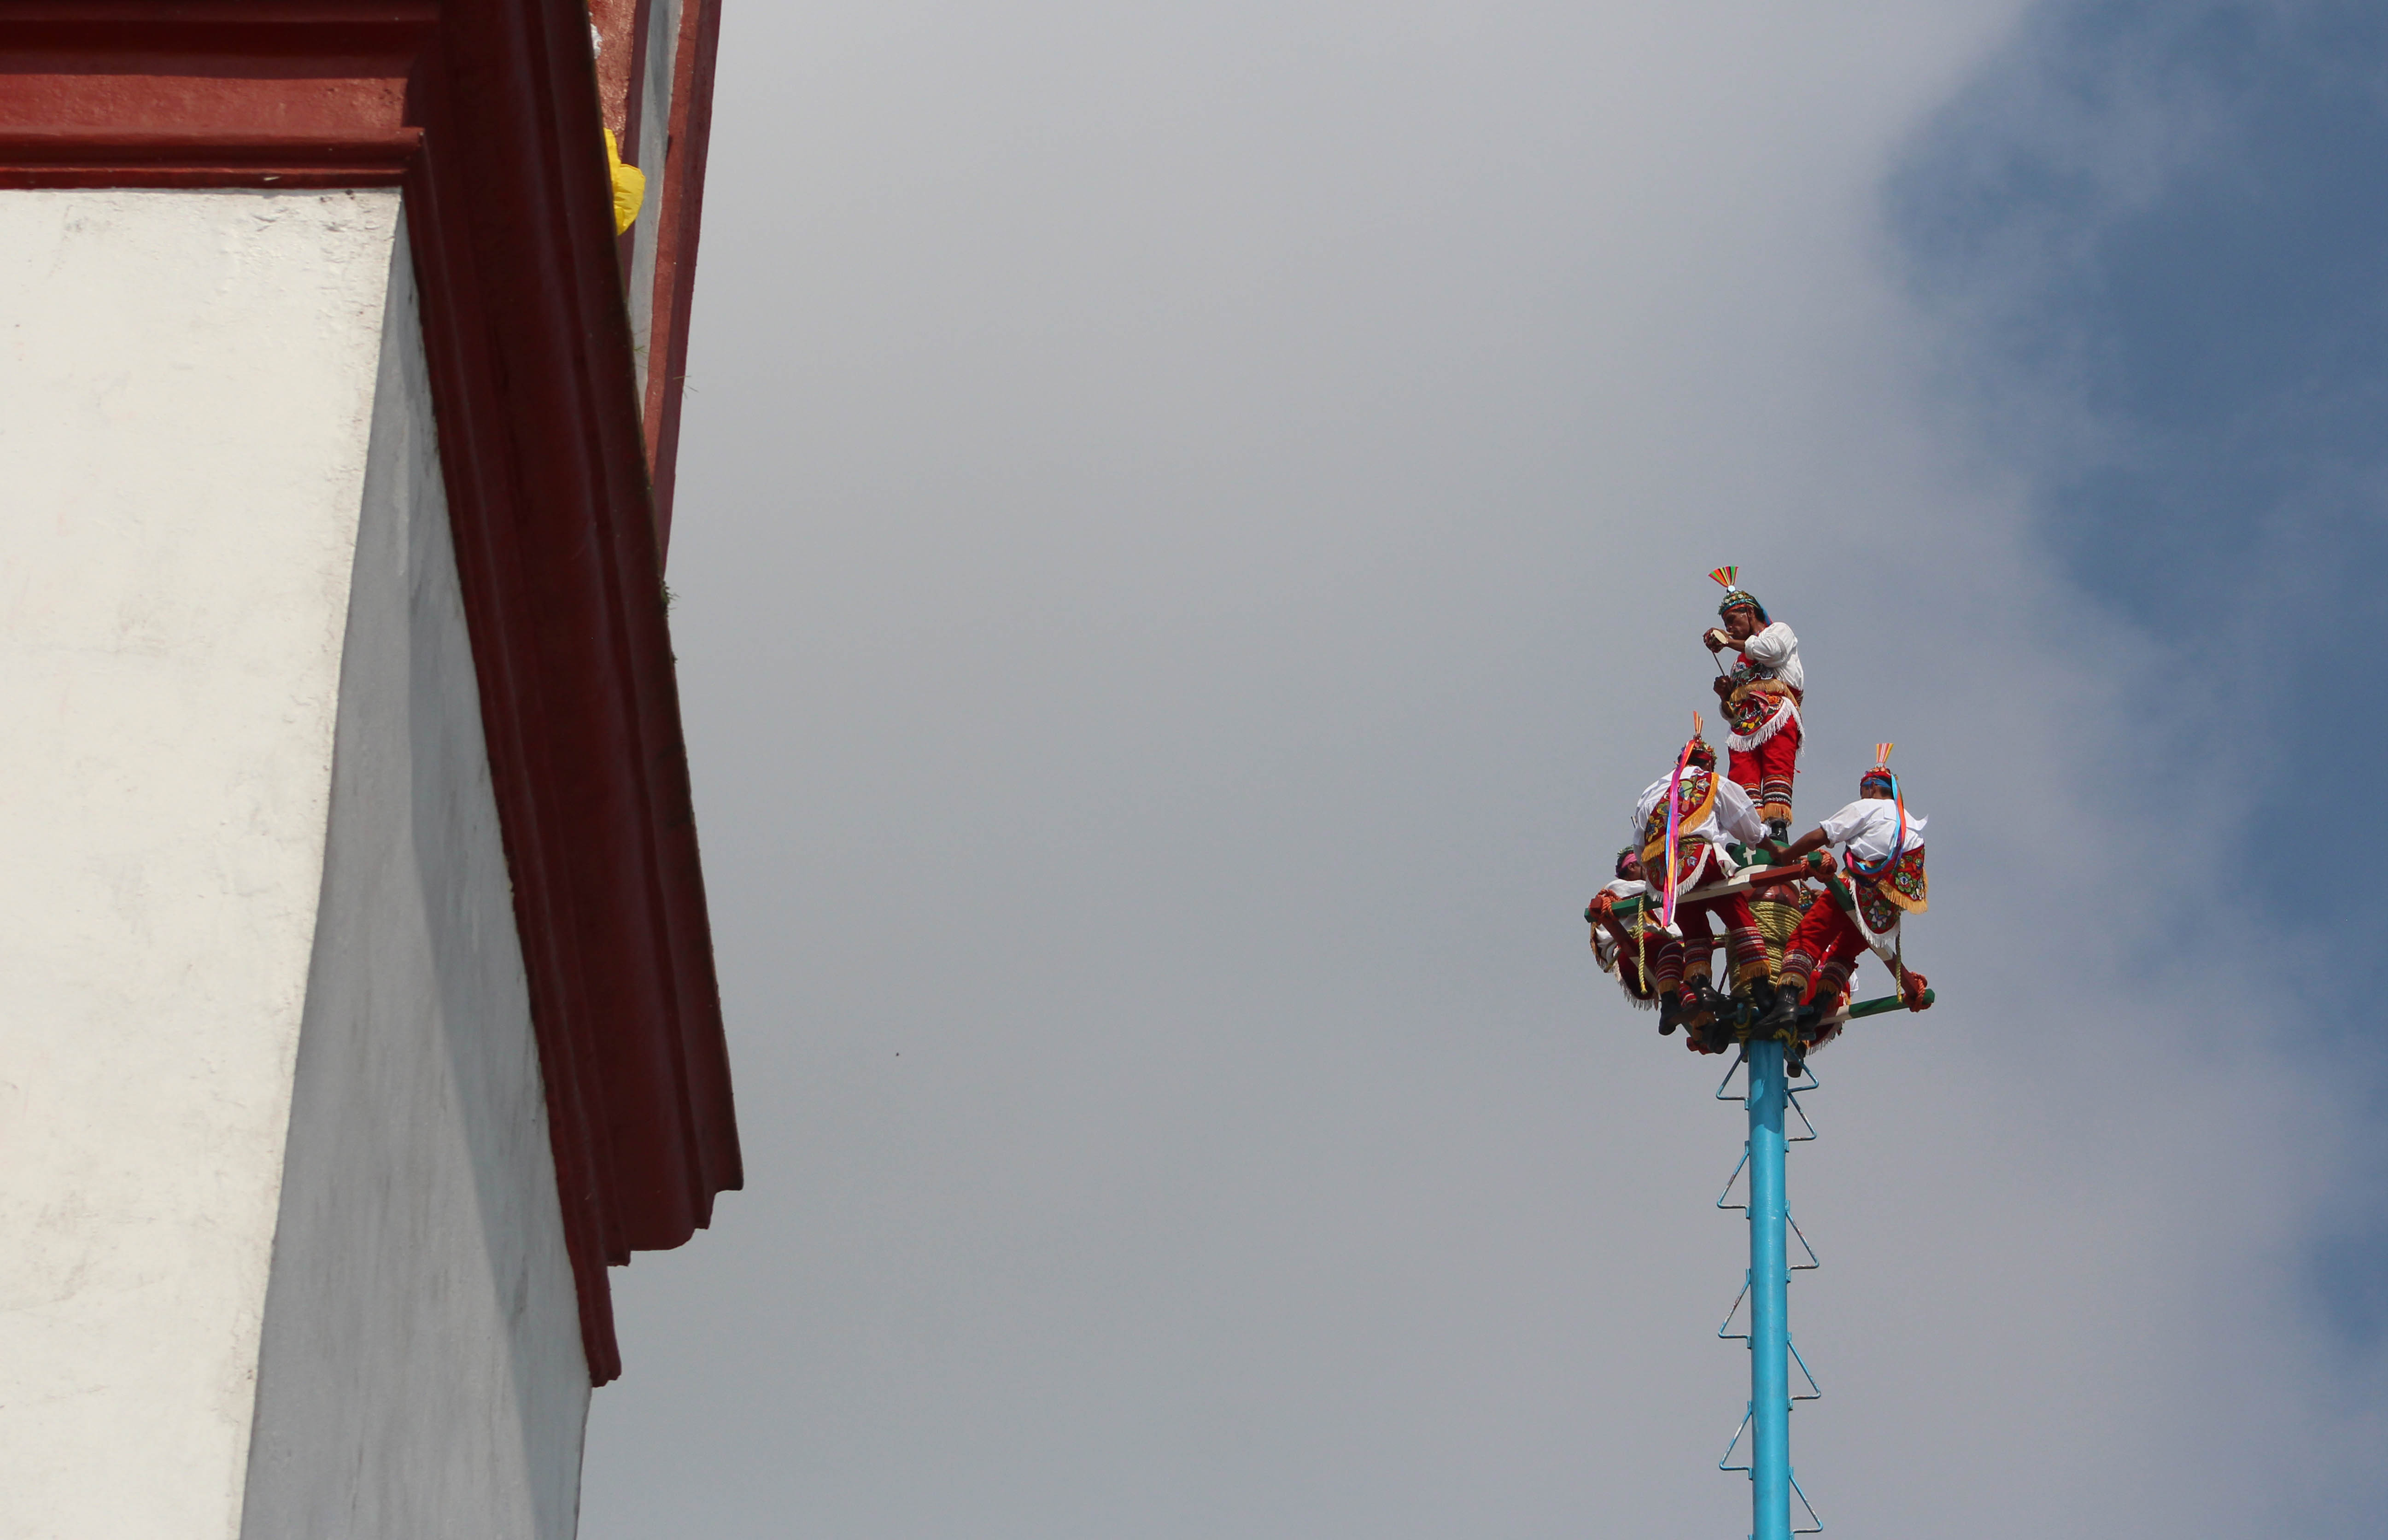 A caporal plays his song before the voladores take flight. (Photo by Amado Treviño)